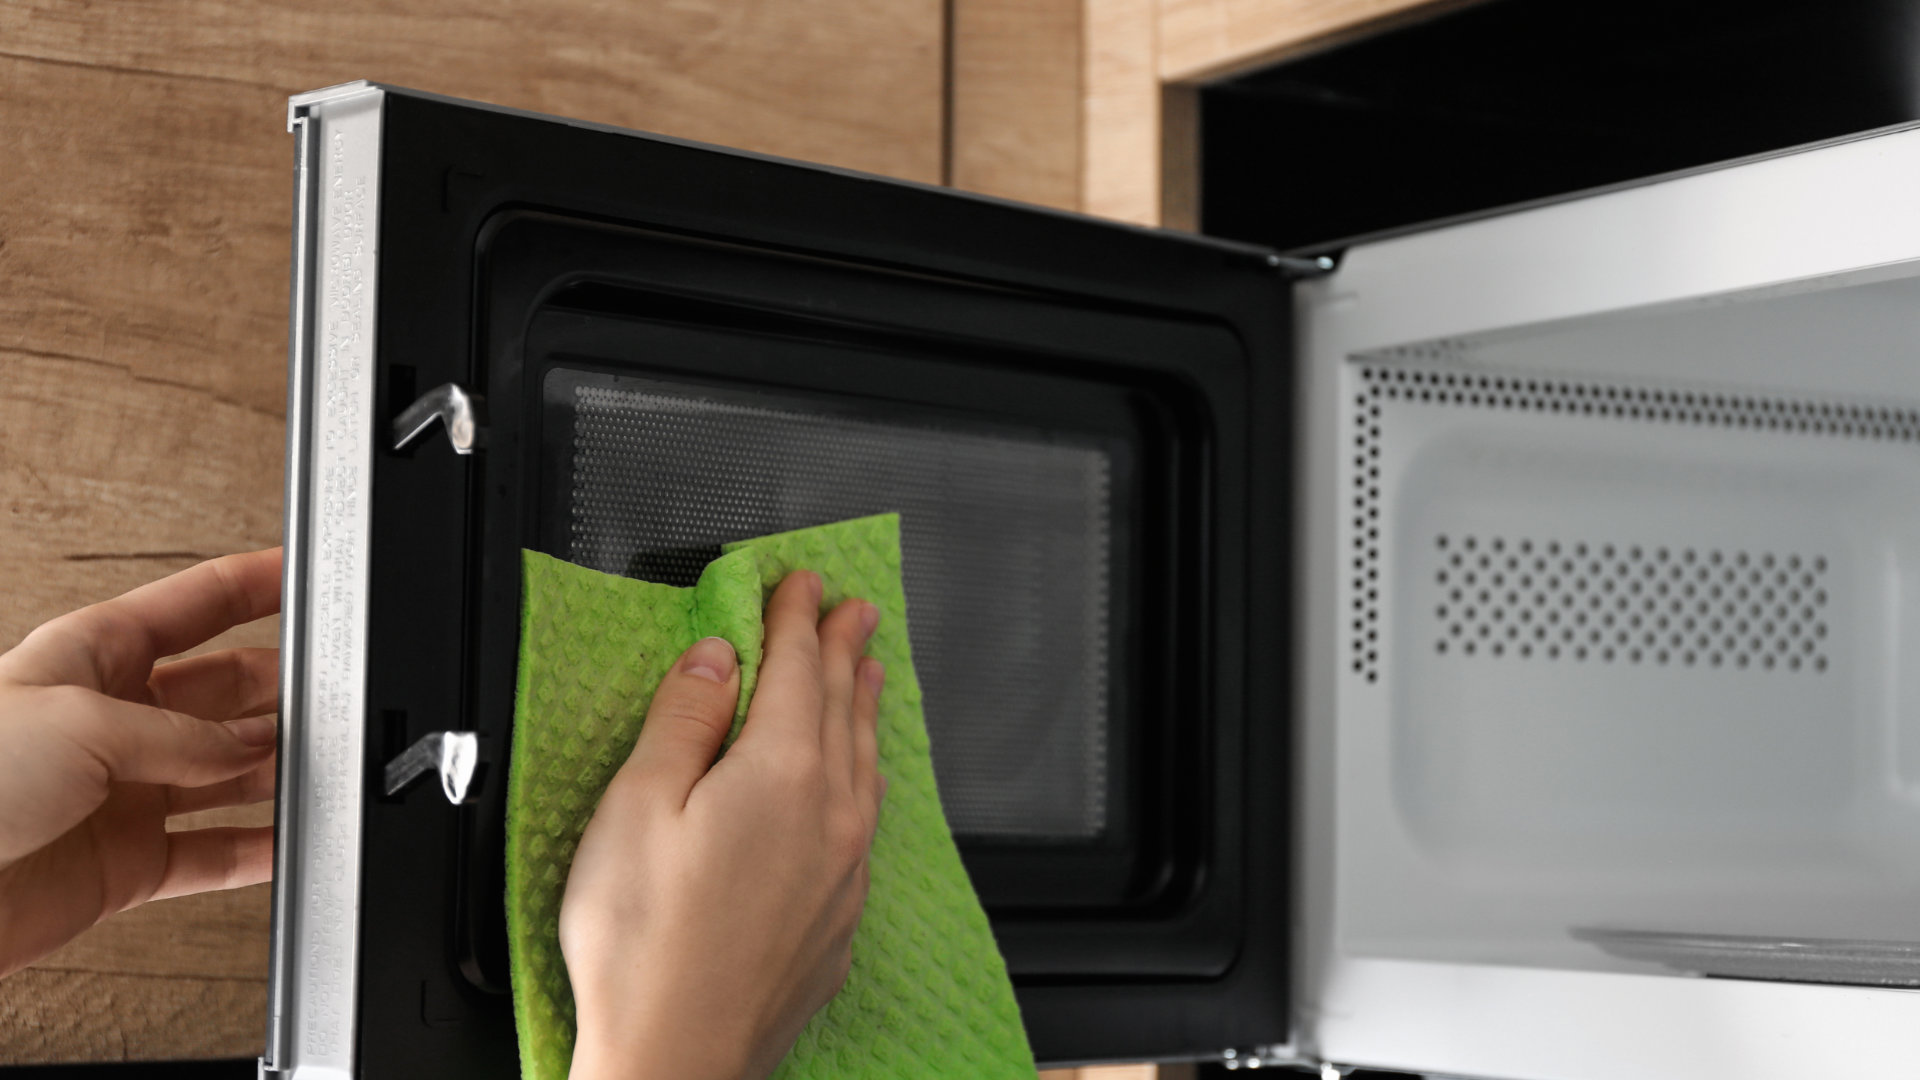 Featured image for “How to Clean a Microwave Naturally with Lemon”